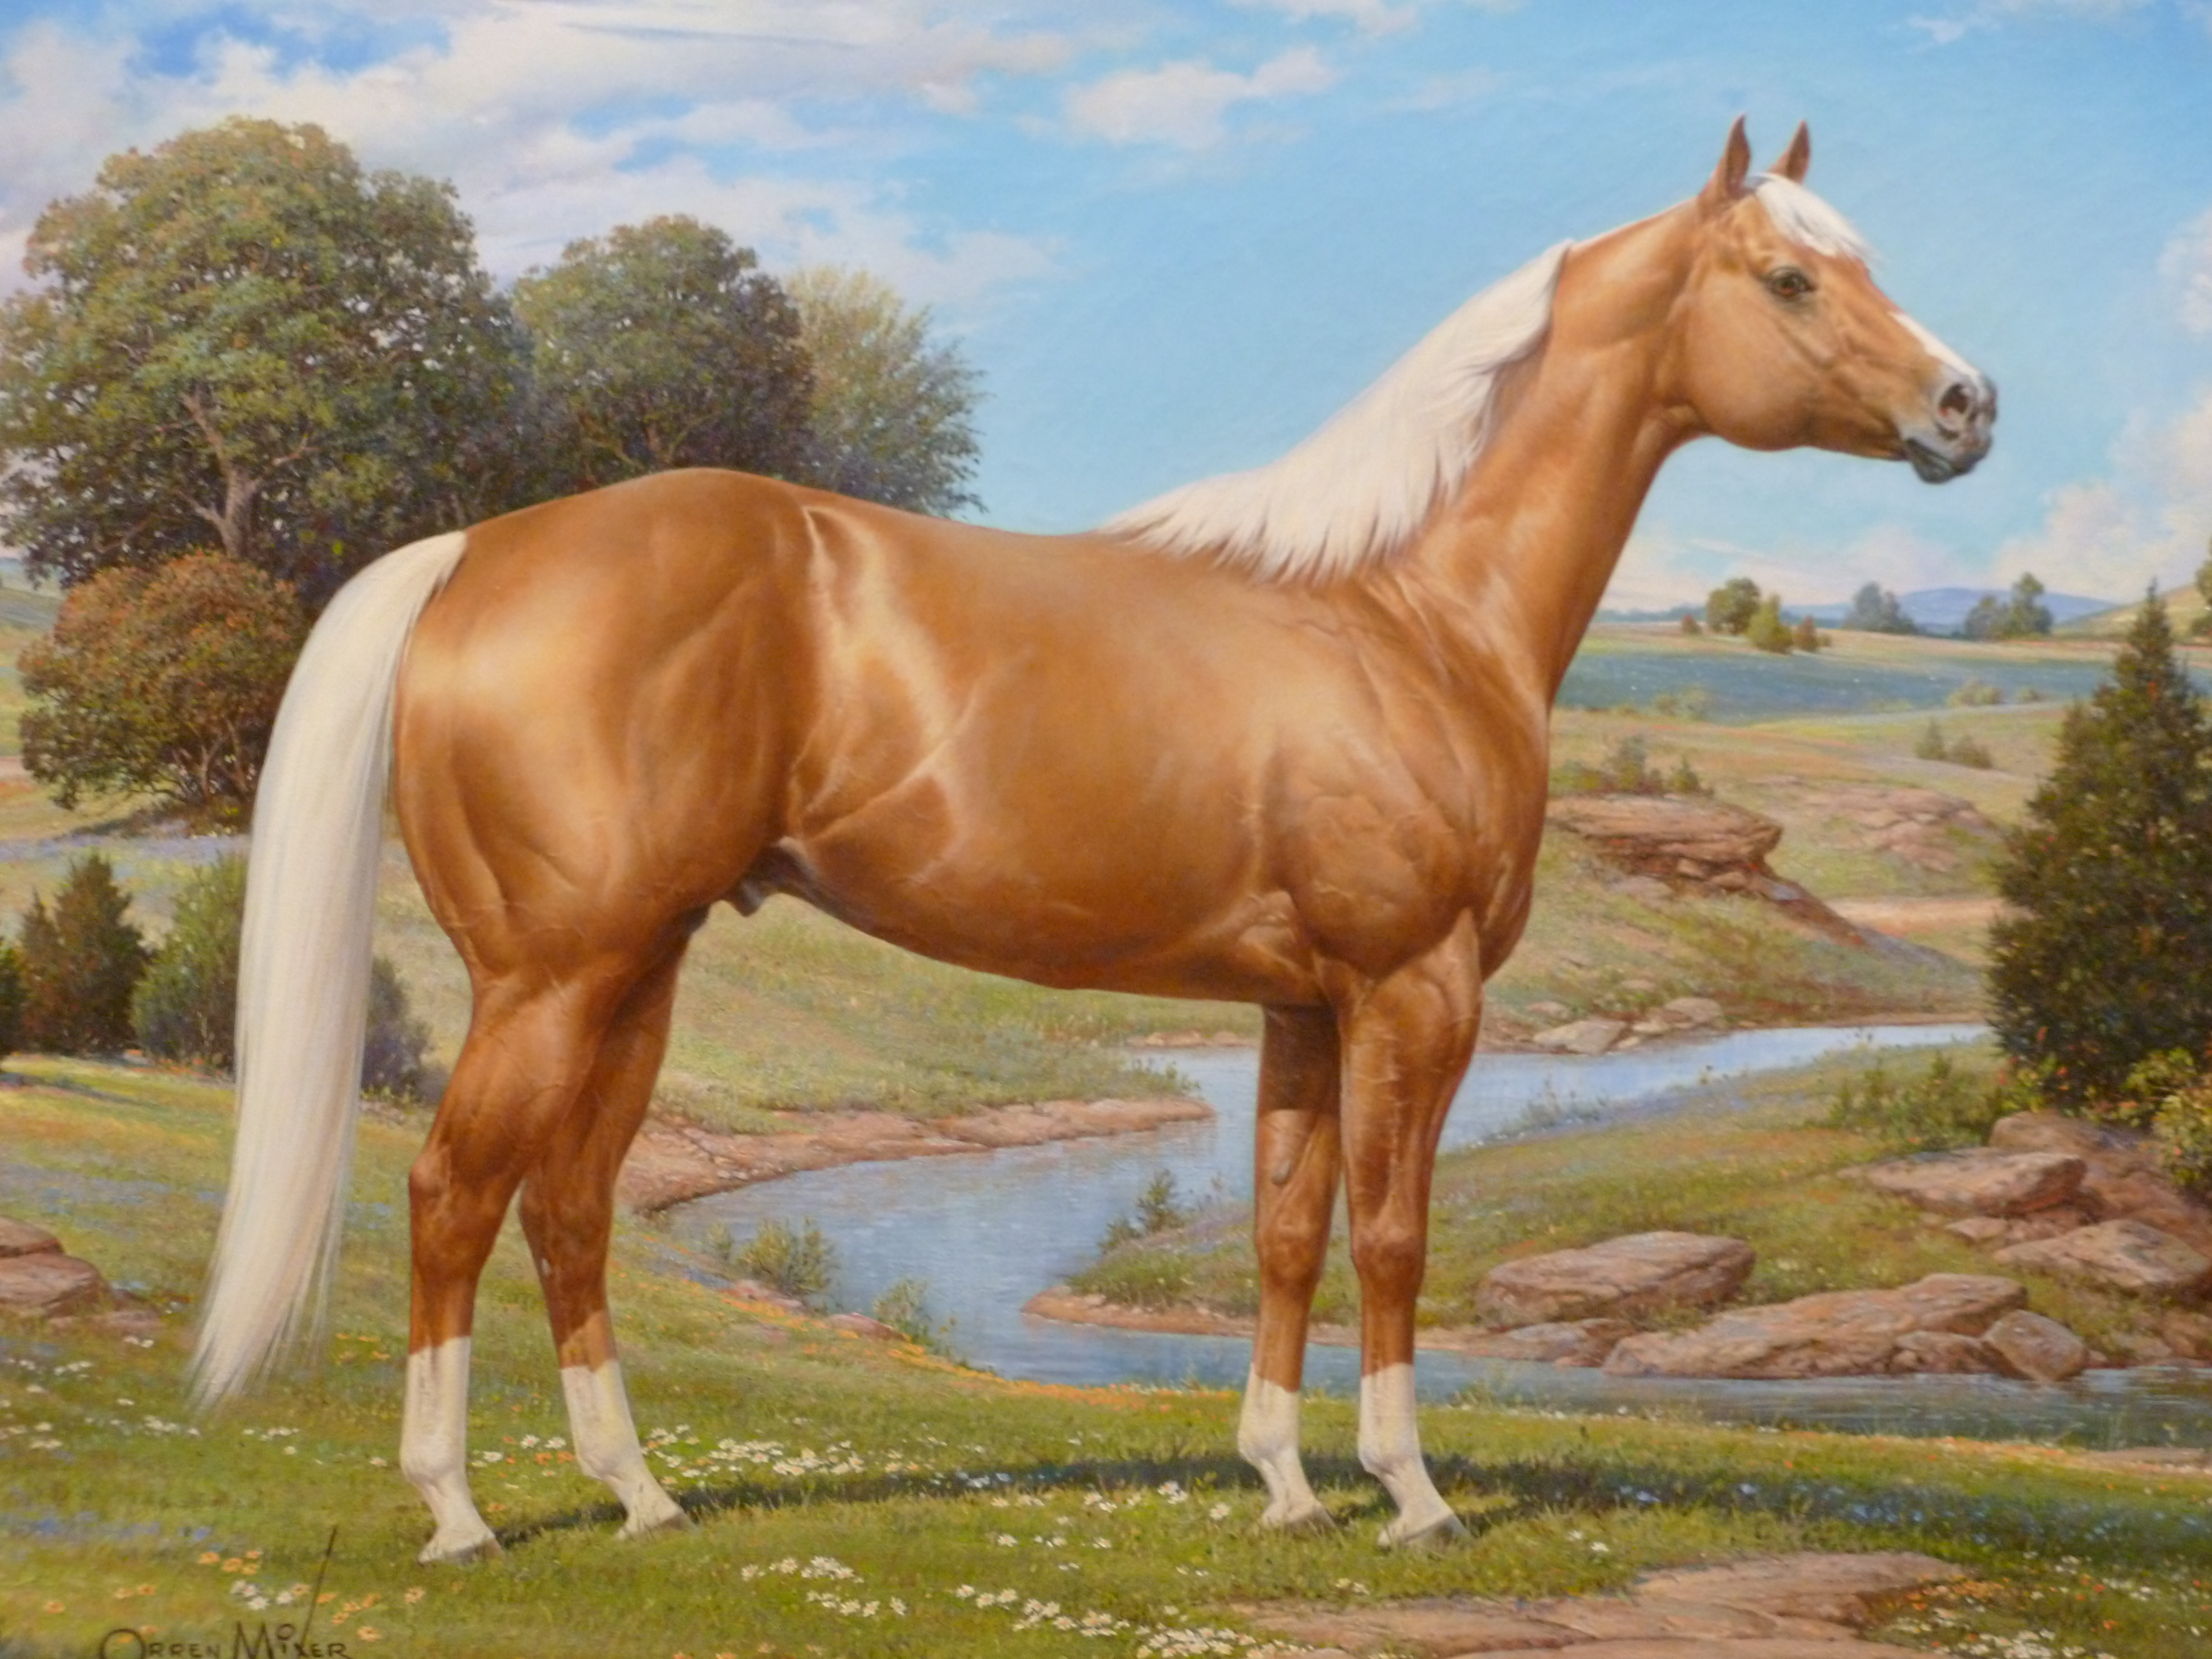 REVIEW: American Quarter Horse celebrated - The Ranger | Just Things ...